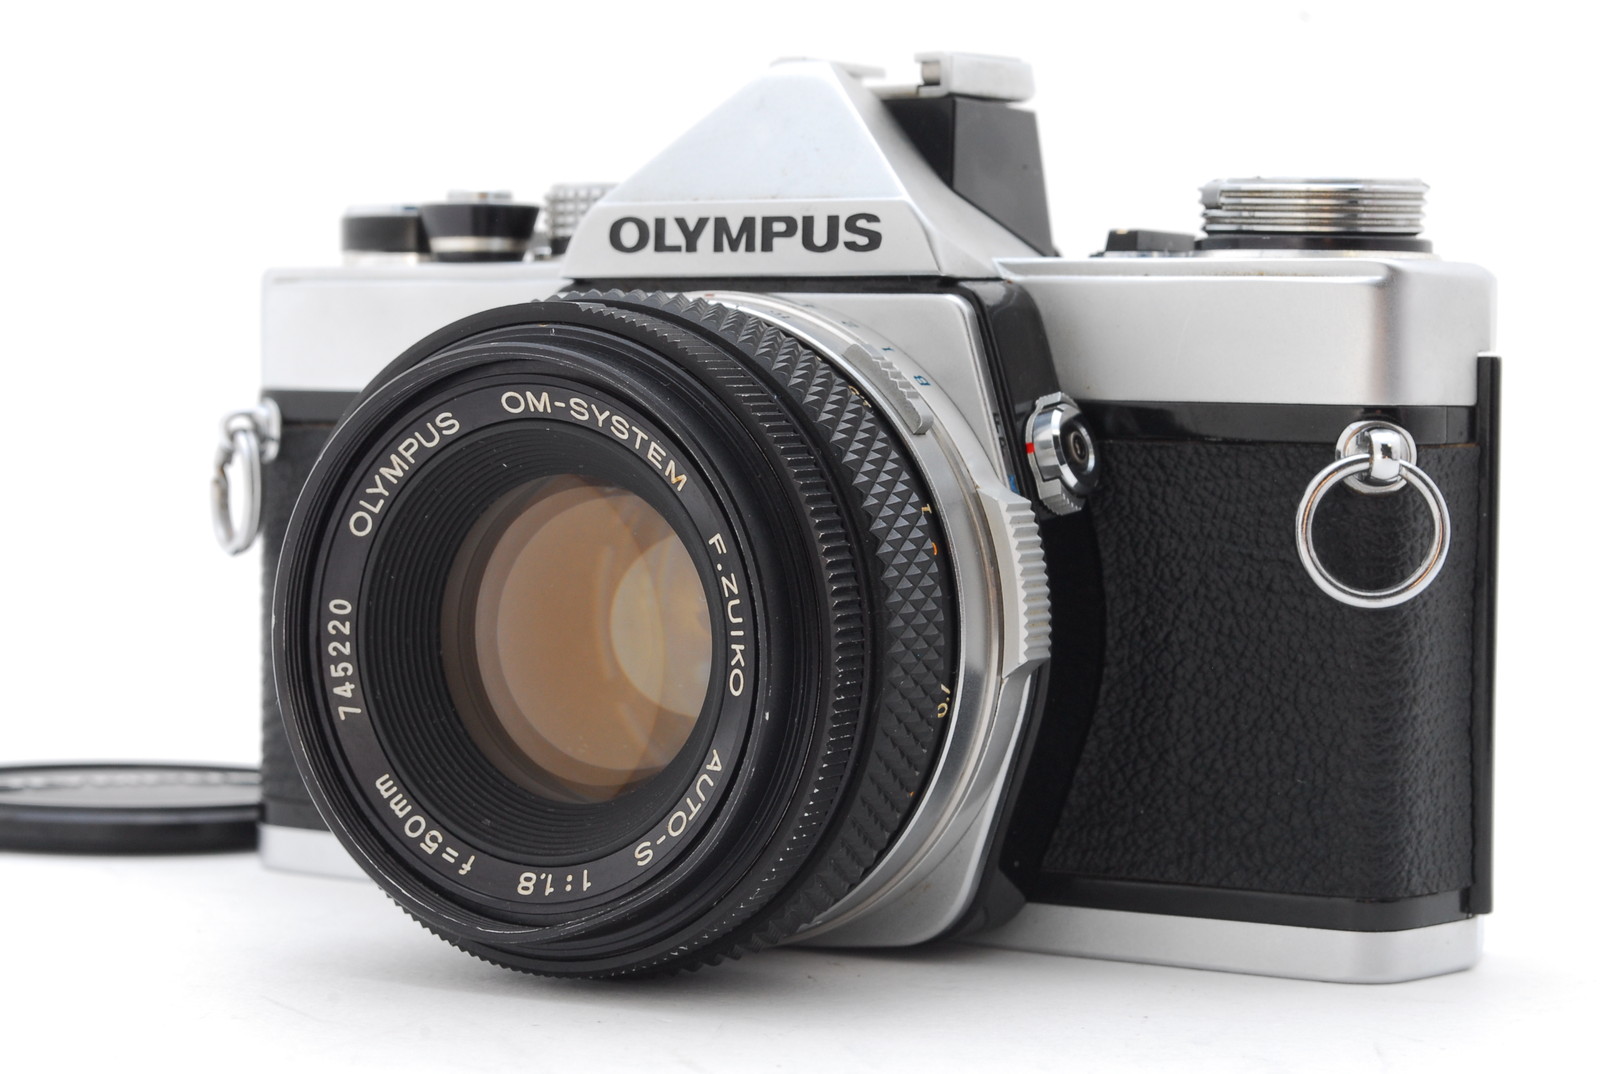 PROMOTION. EXC++++ Olympus OM-1 F.ZUIKO AUTO-S 50mm f/1.8, Front Cap 35mm Film Camera SLR from Japan